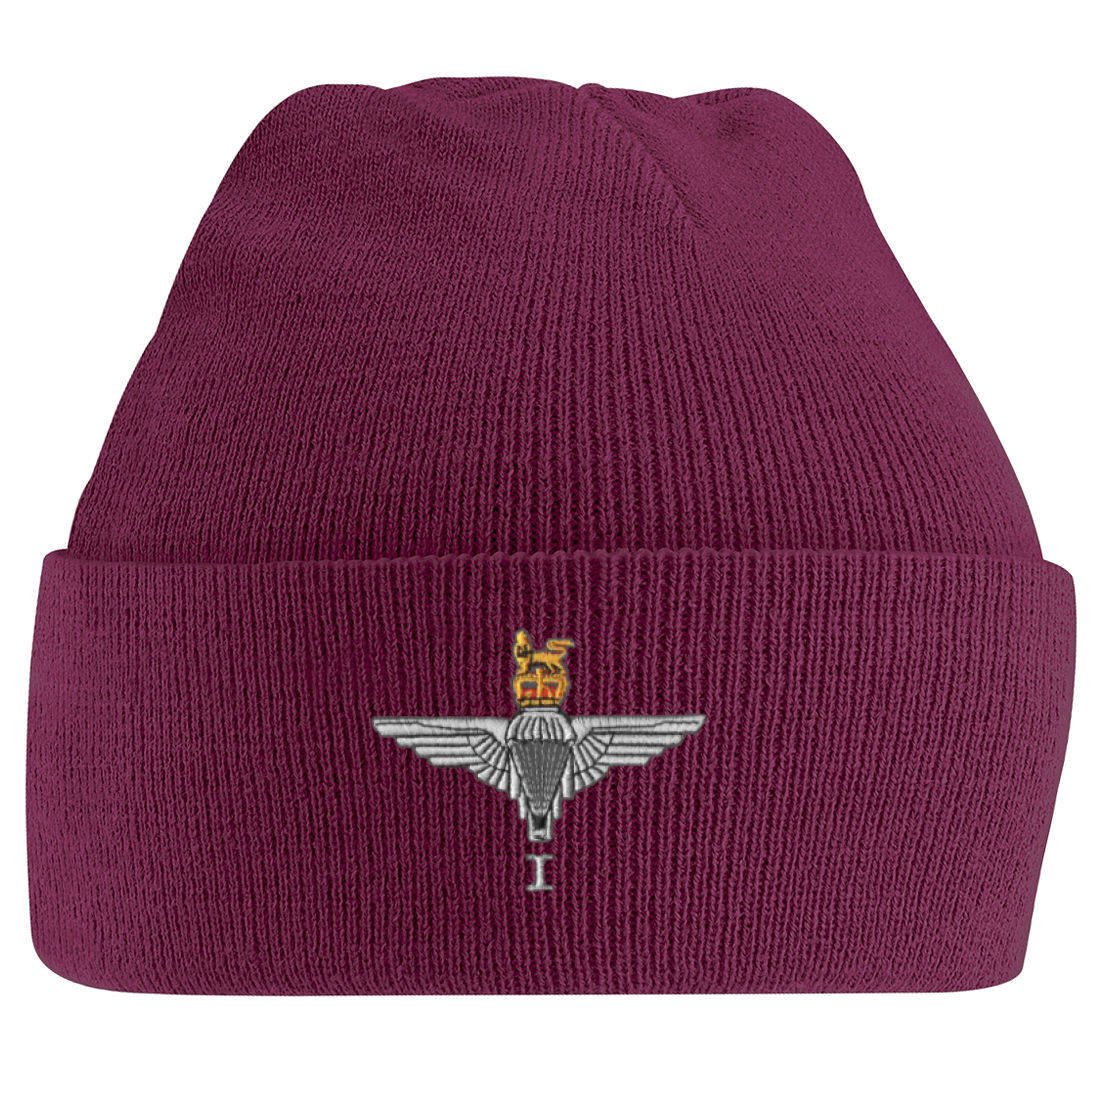 Download Turn-Up Beanie Hat - Headwear - Clothing - The Airborne Shop